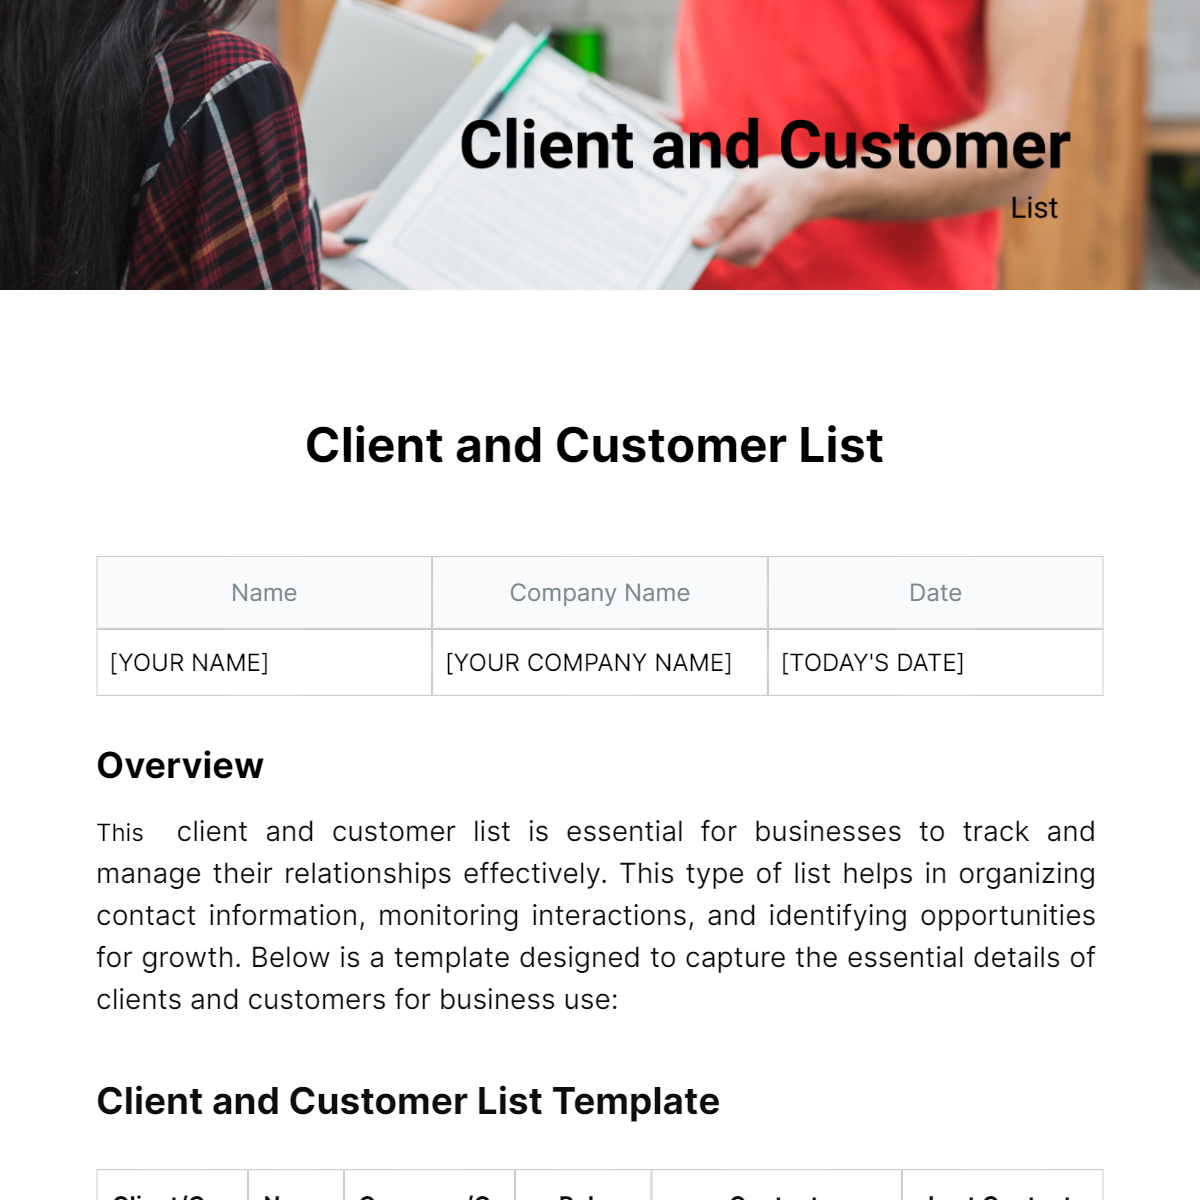 Client and Customer List Template